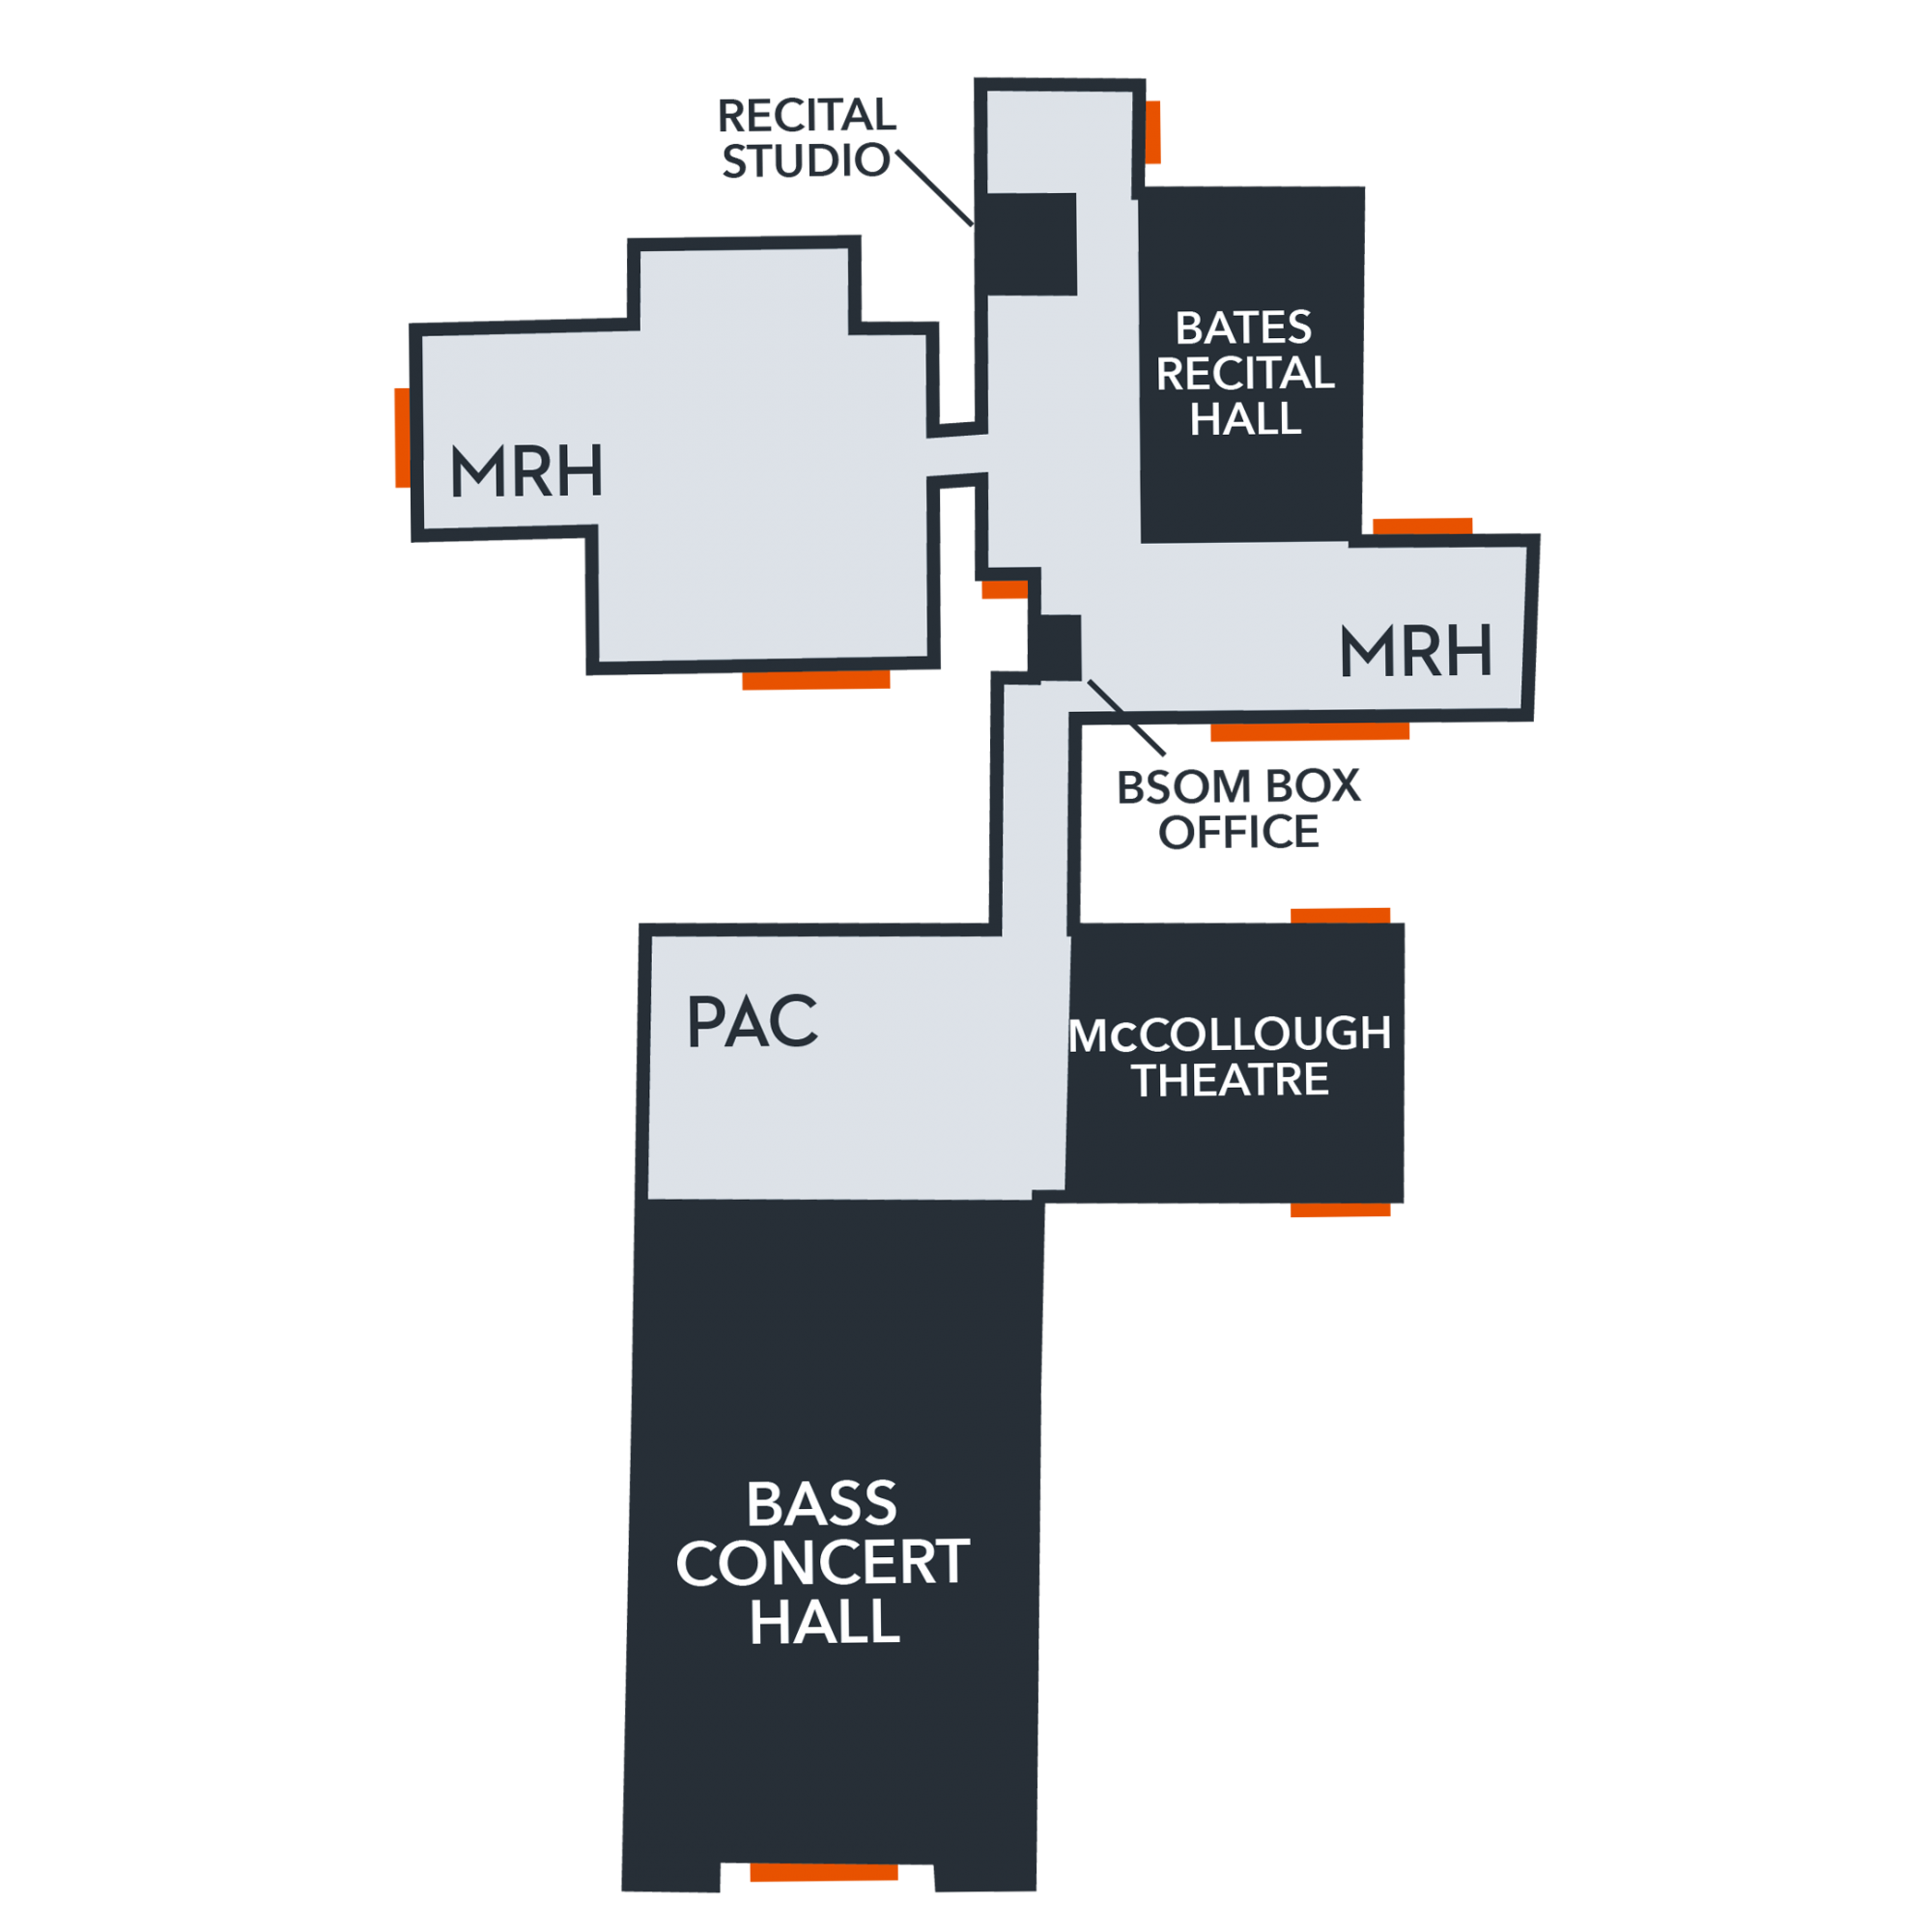 A map showing locations of venues inside the MRH building